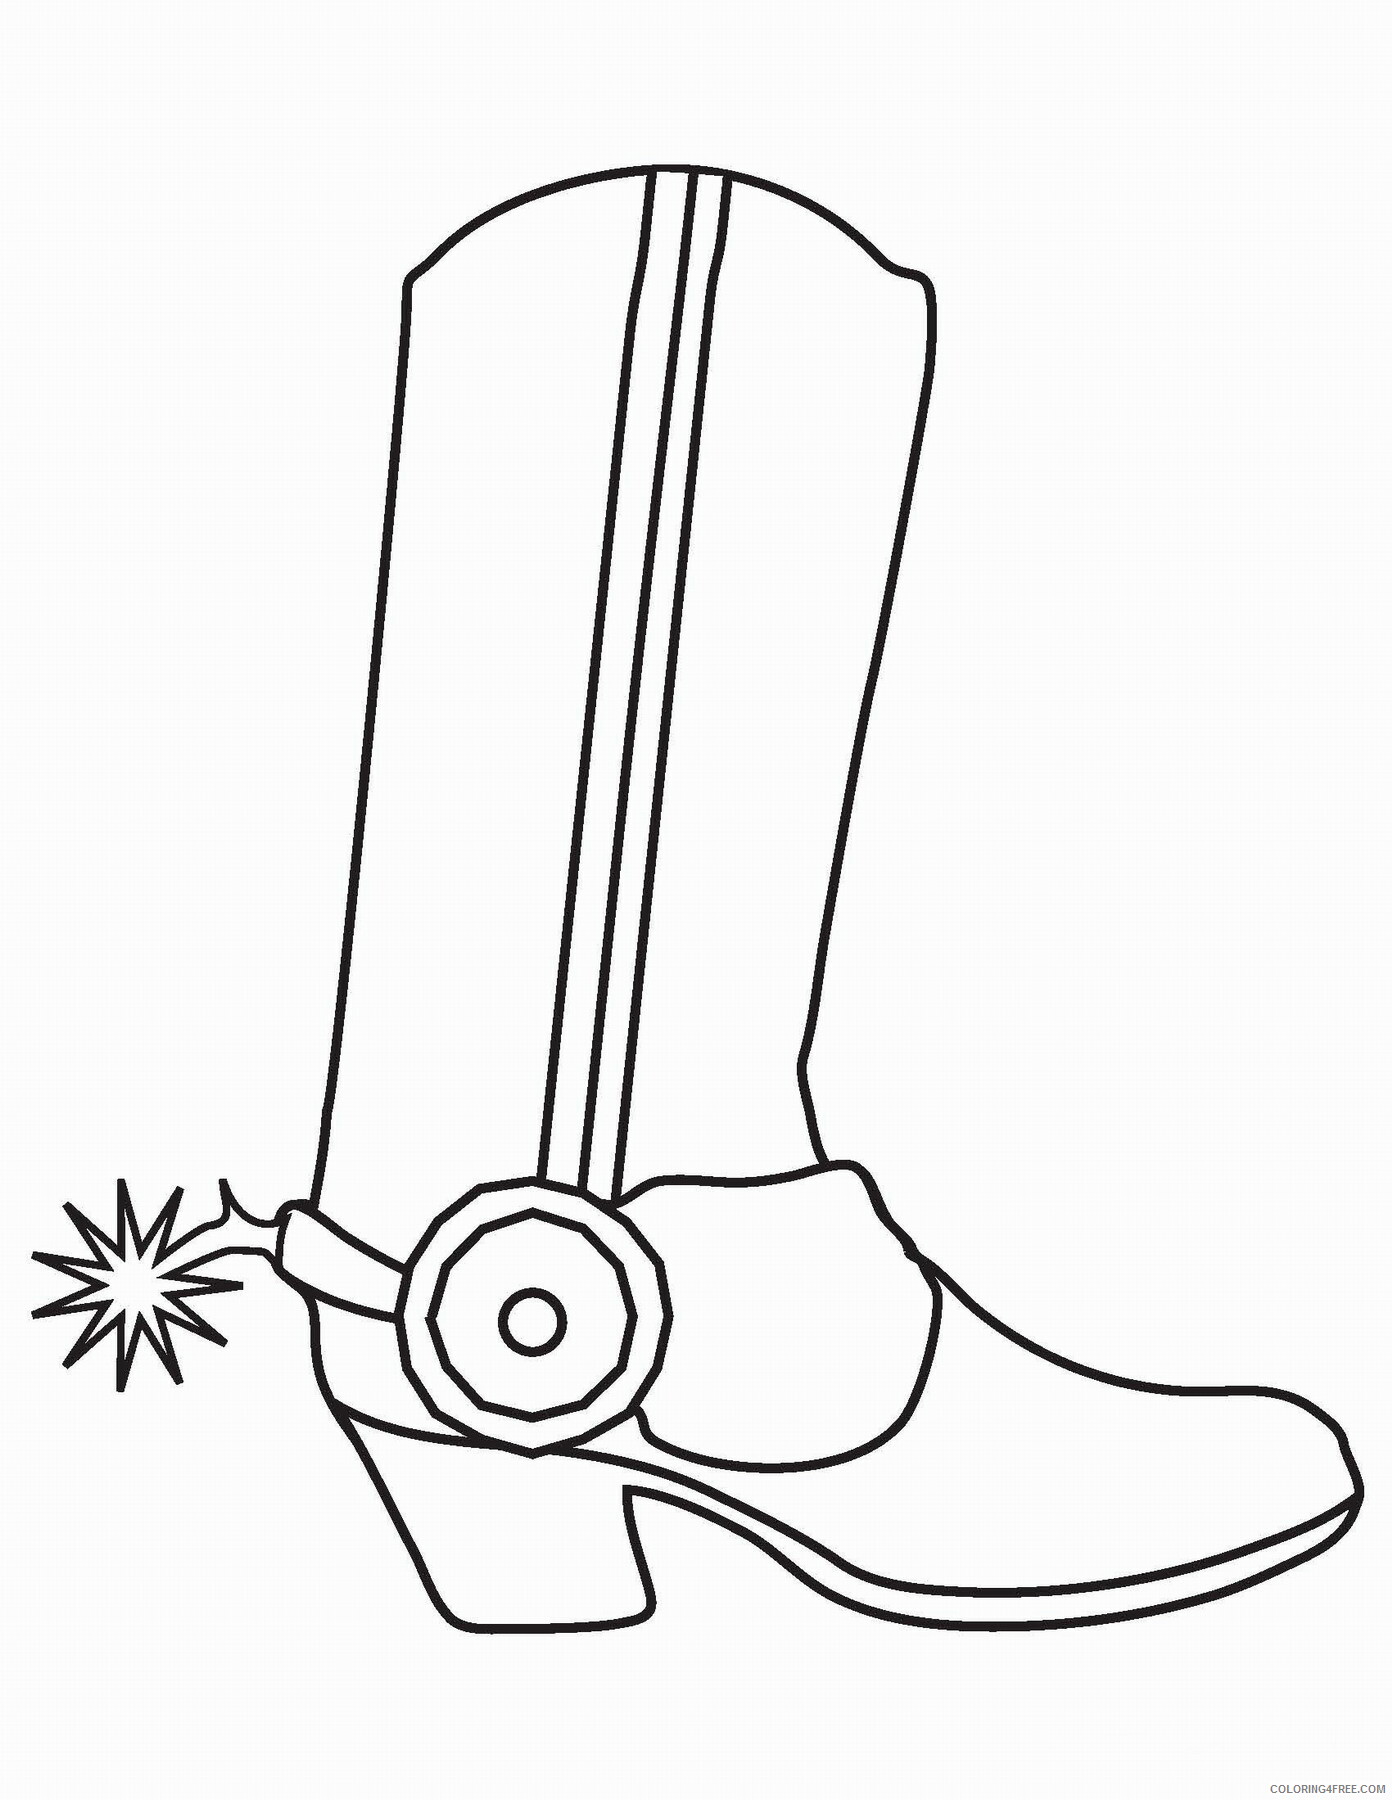 Cowboy Coloring Pages for boys cowboy_03 Printable 2020 0181 Coloring4free